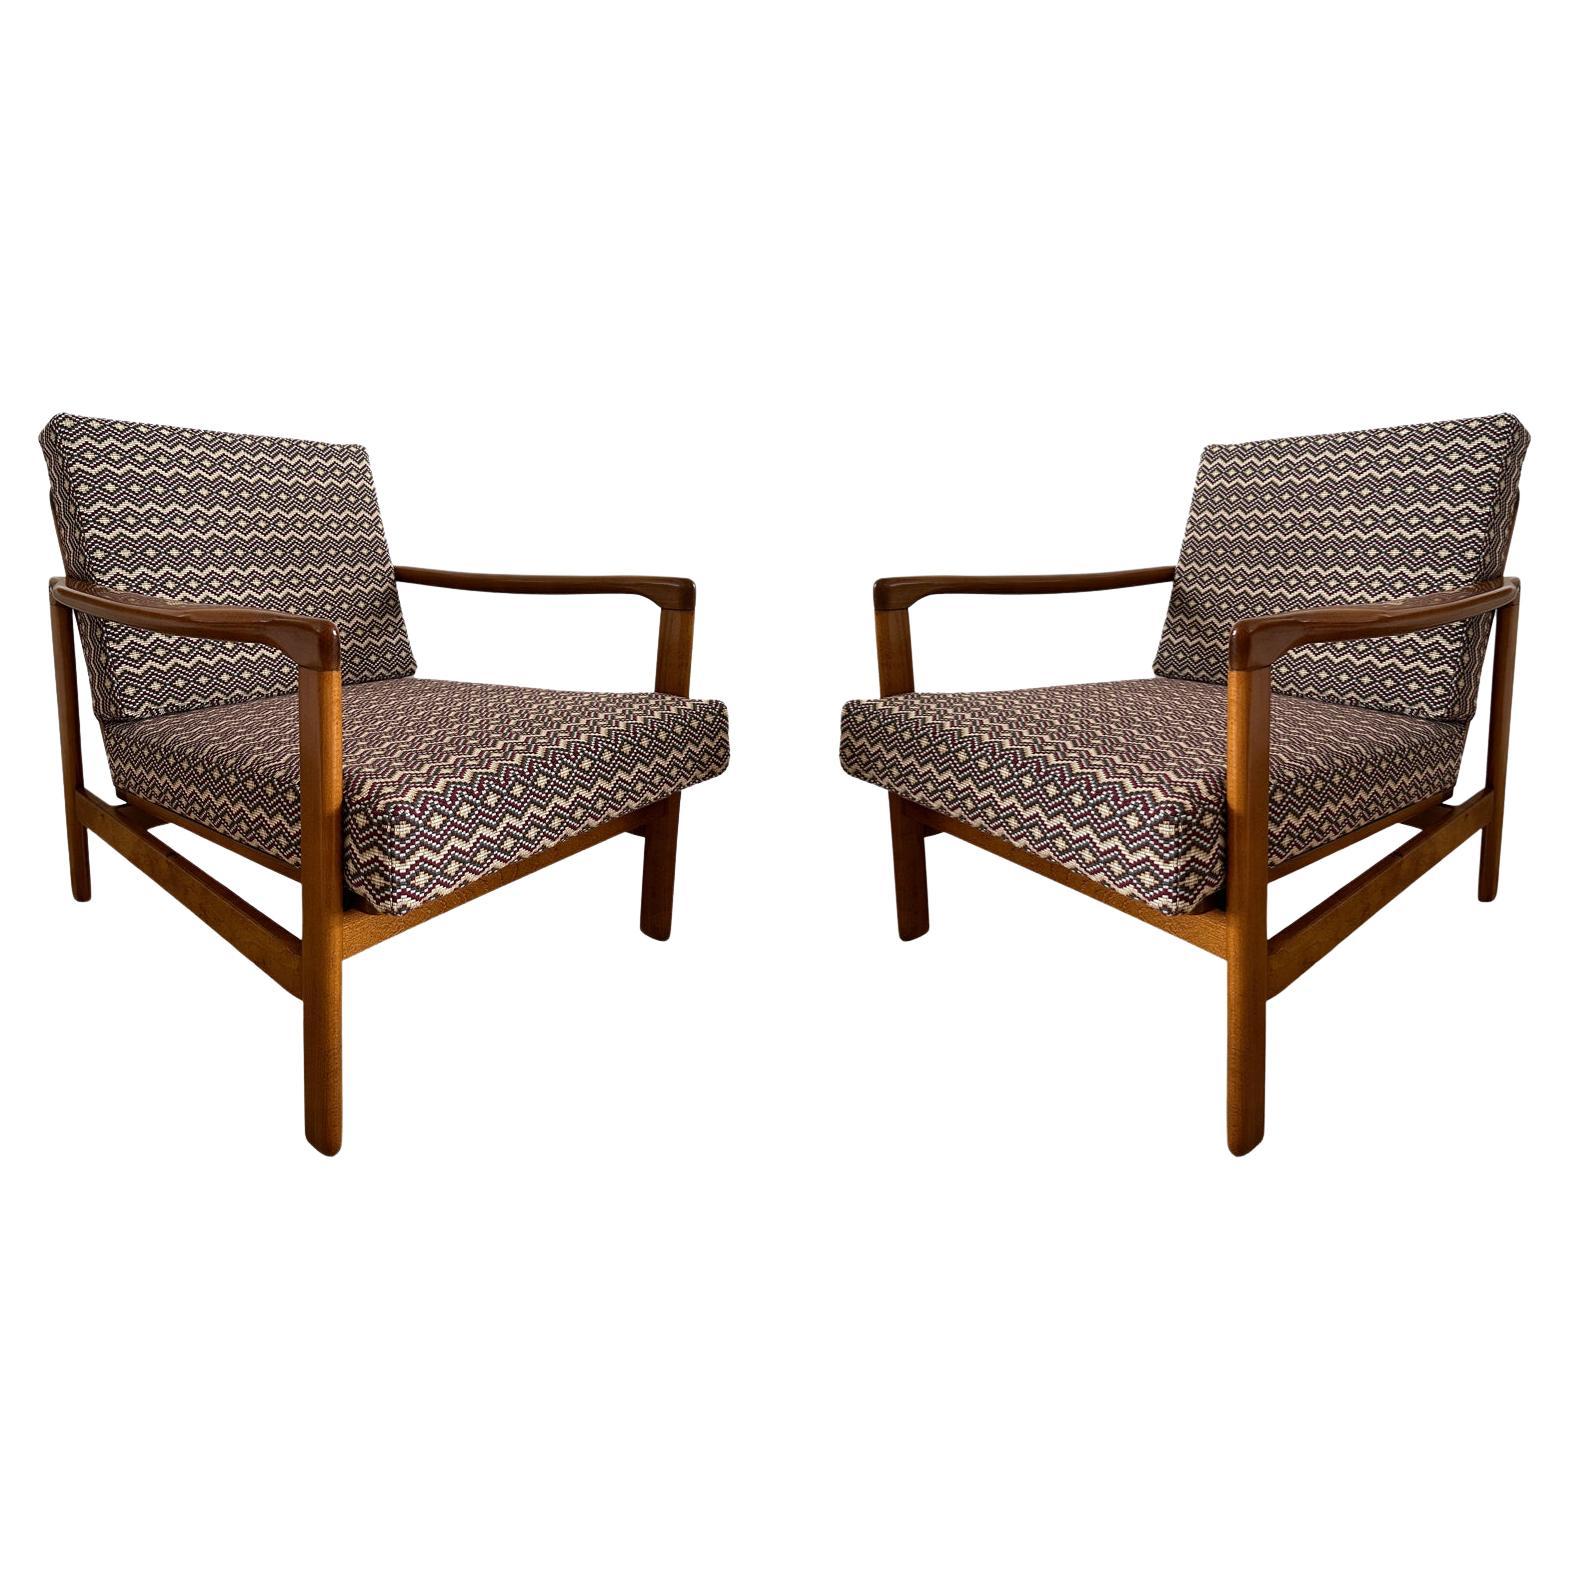 Set of Two Armchairs, Light Wood, Gaston Y Daniela Upholstery, Europe, 1960s